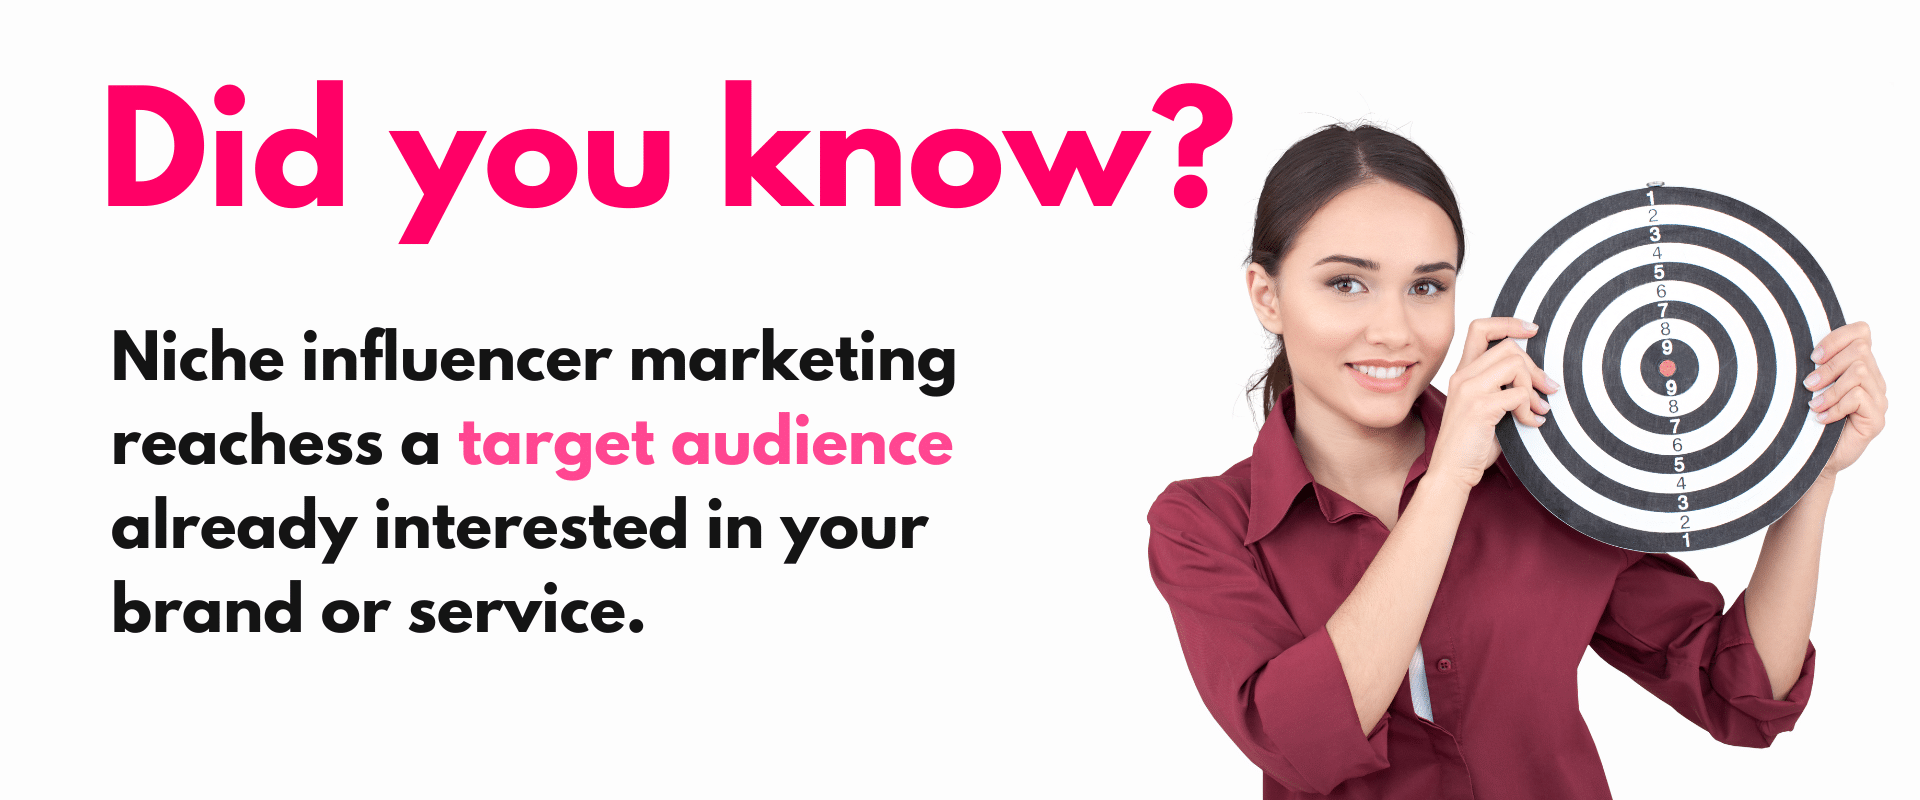 Did you know? influencer marketing reaches target audience interested in your brand or service.